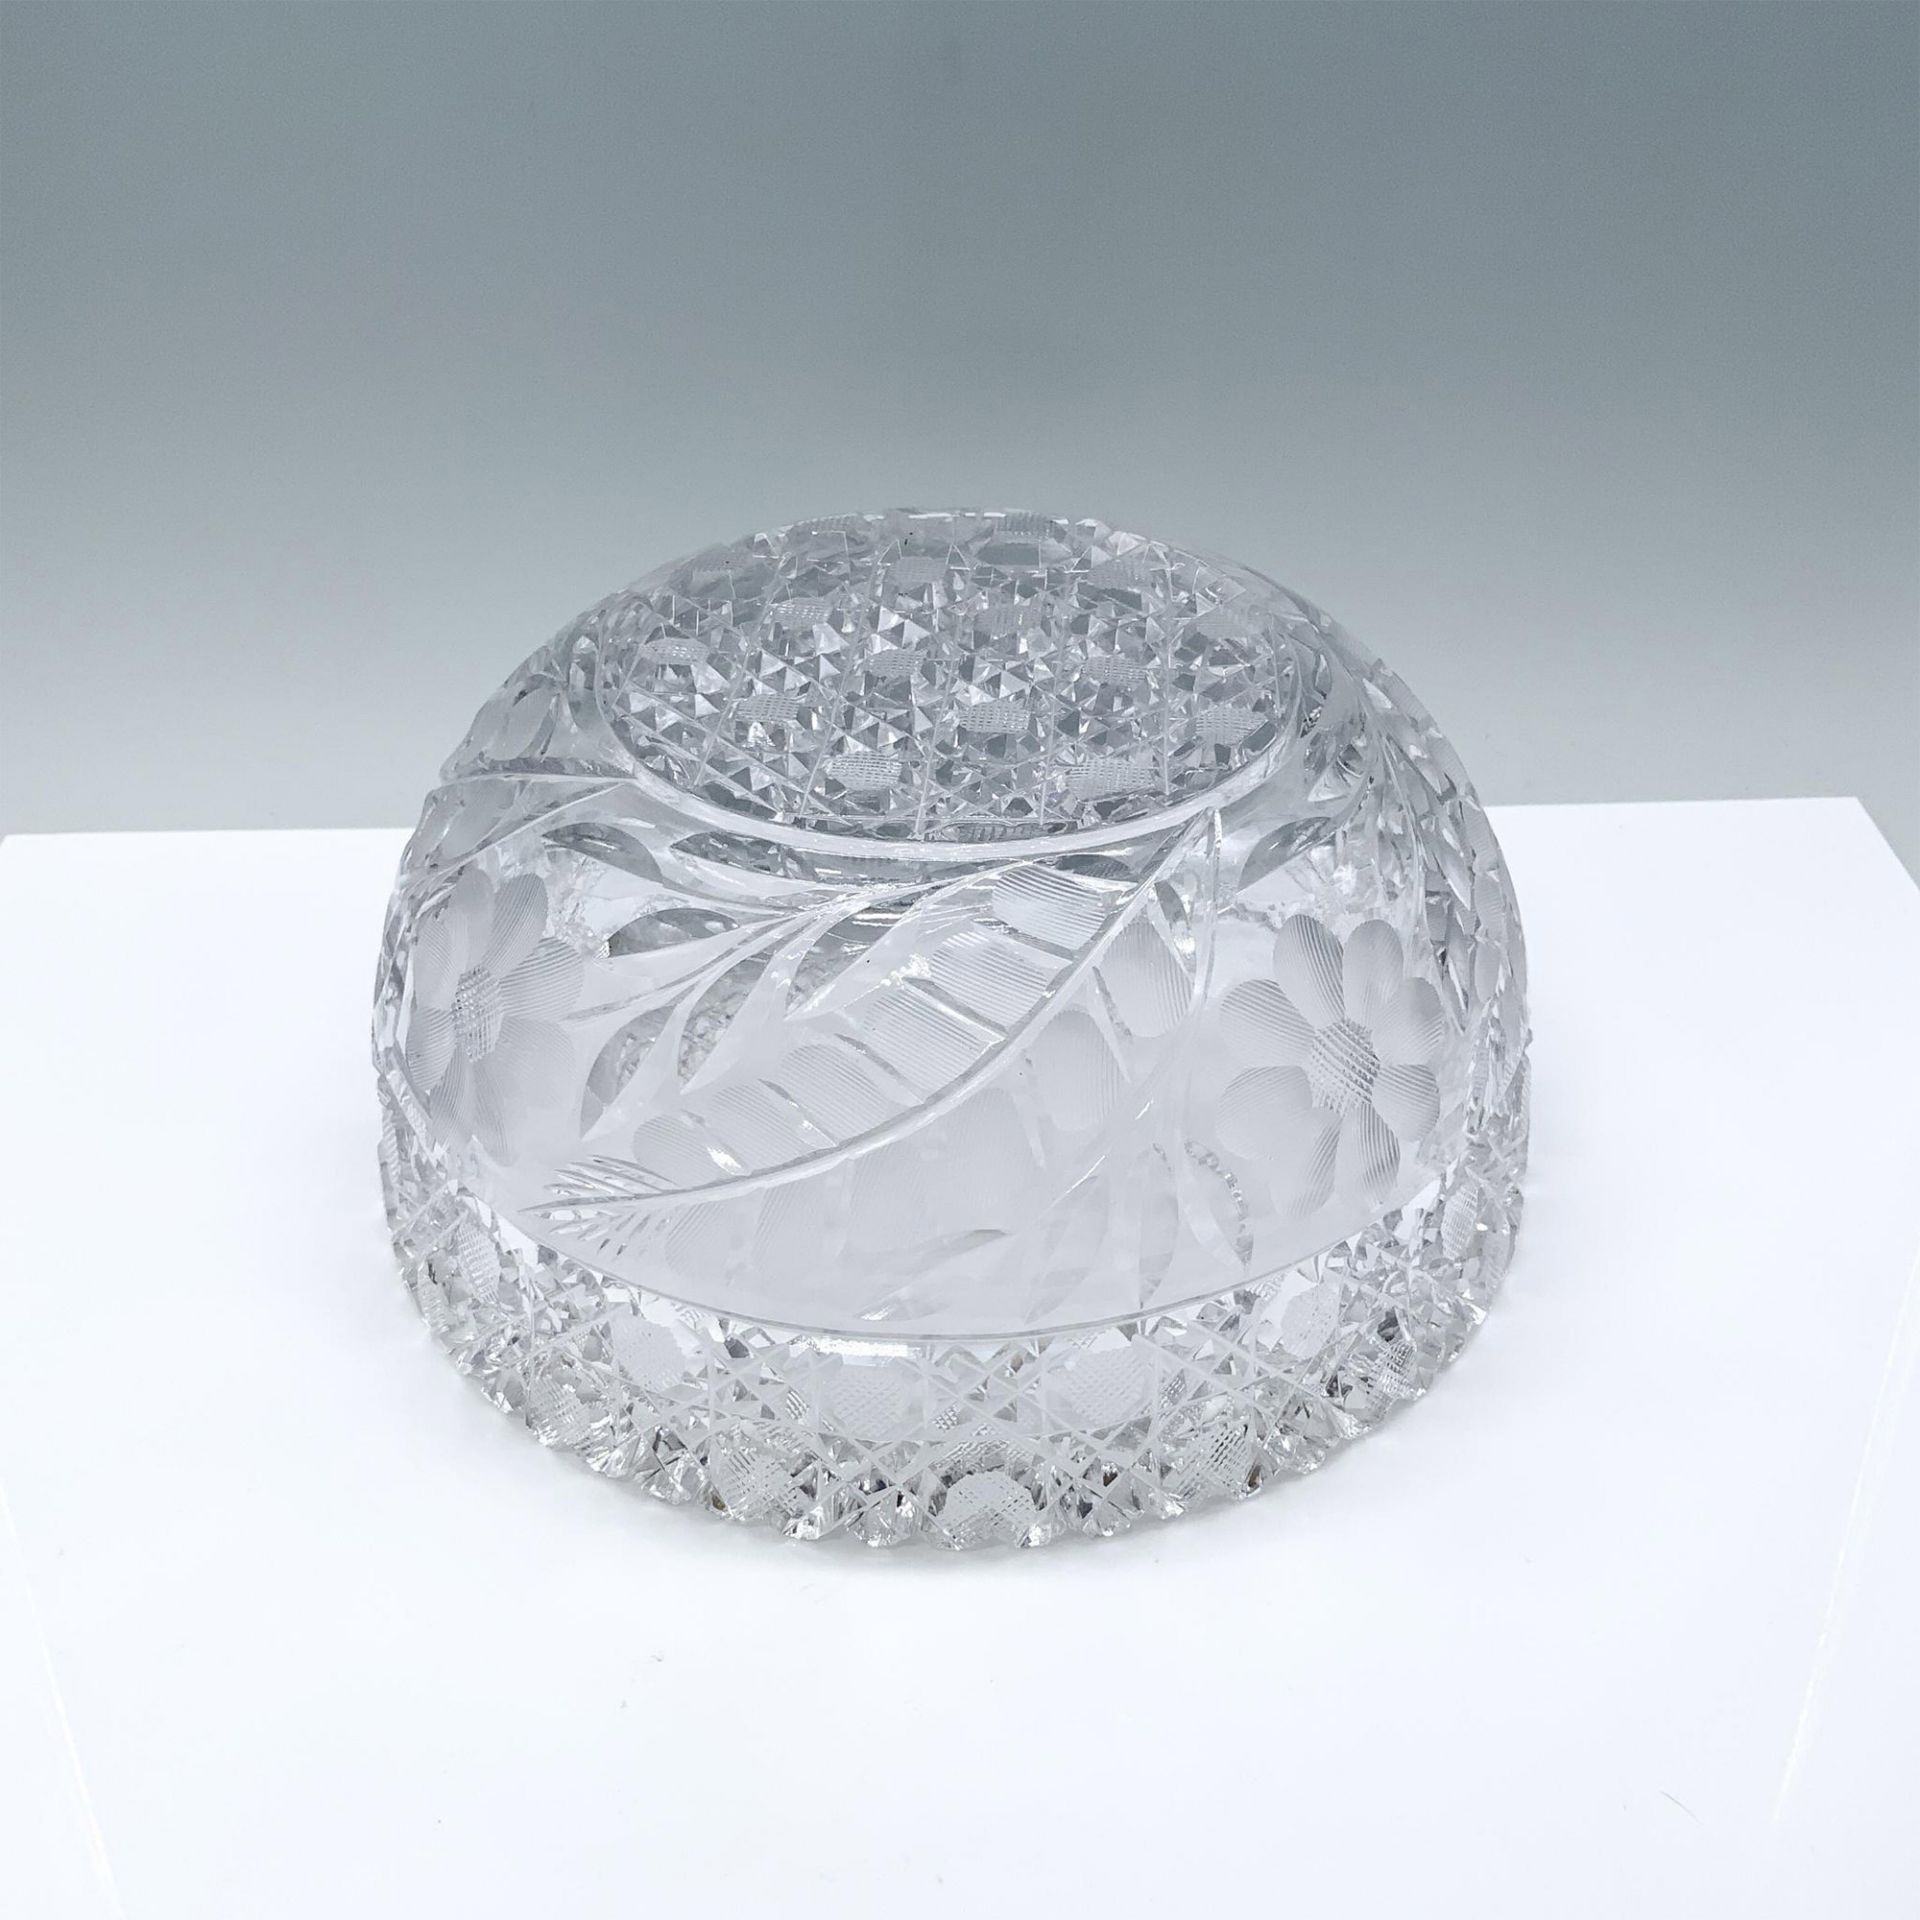 Glass Cut Floral Themed Serving Bowl - Image 3 of 3